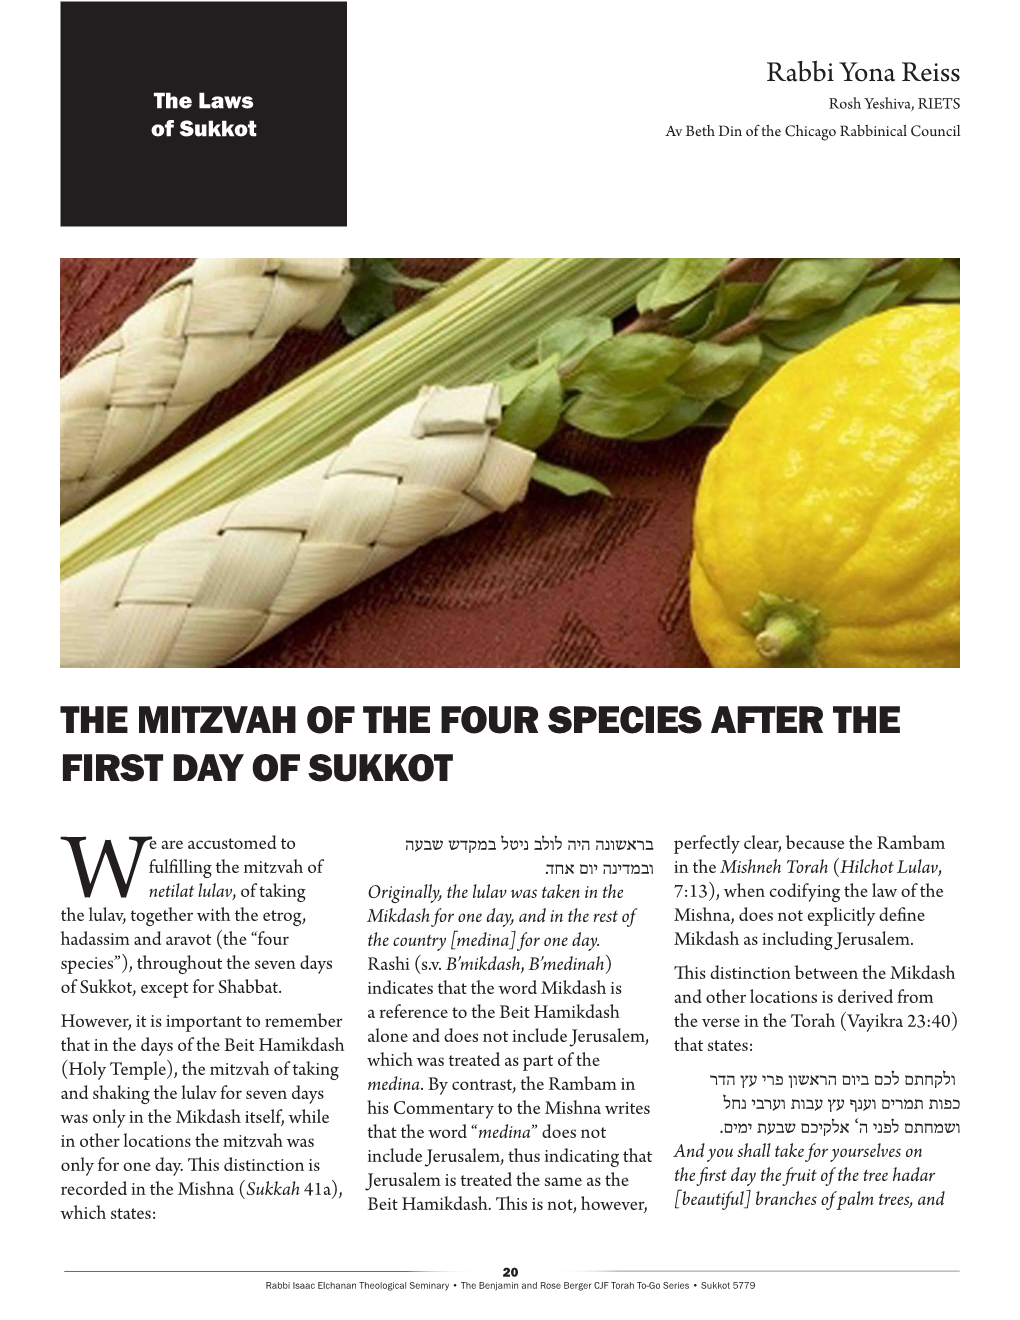 The Mitzvah of the Four Species After the First Day of Sukkot